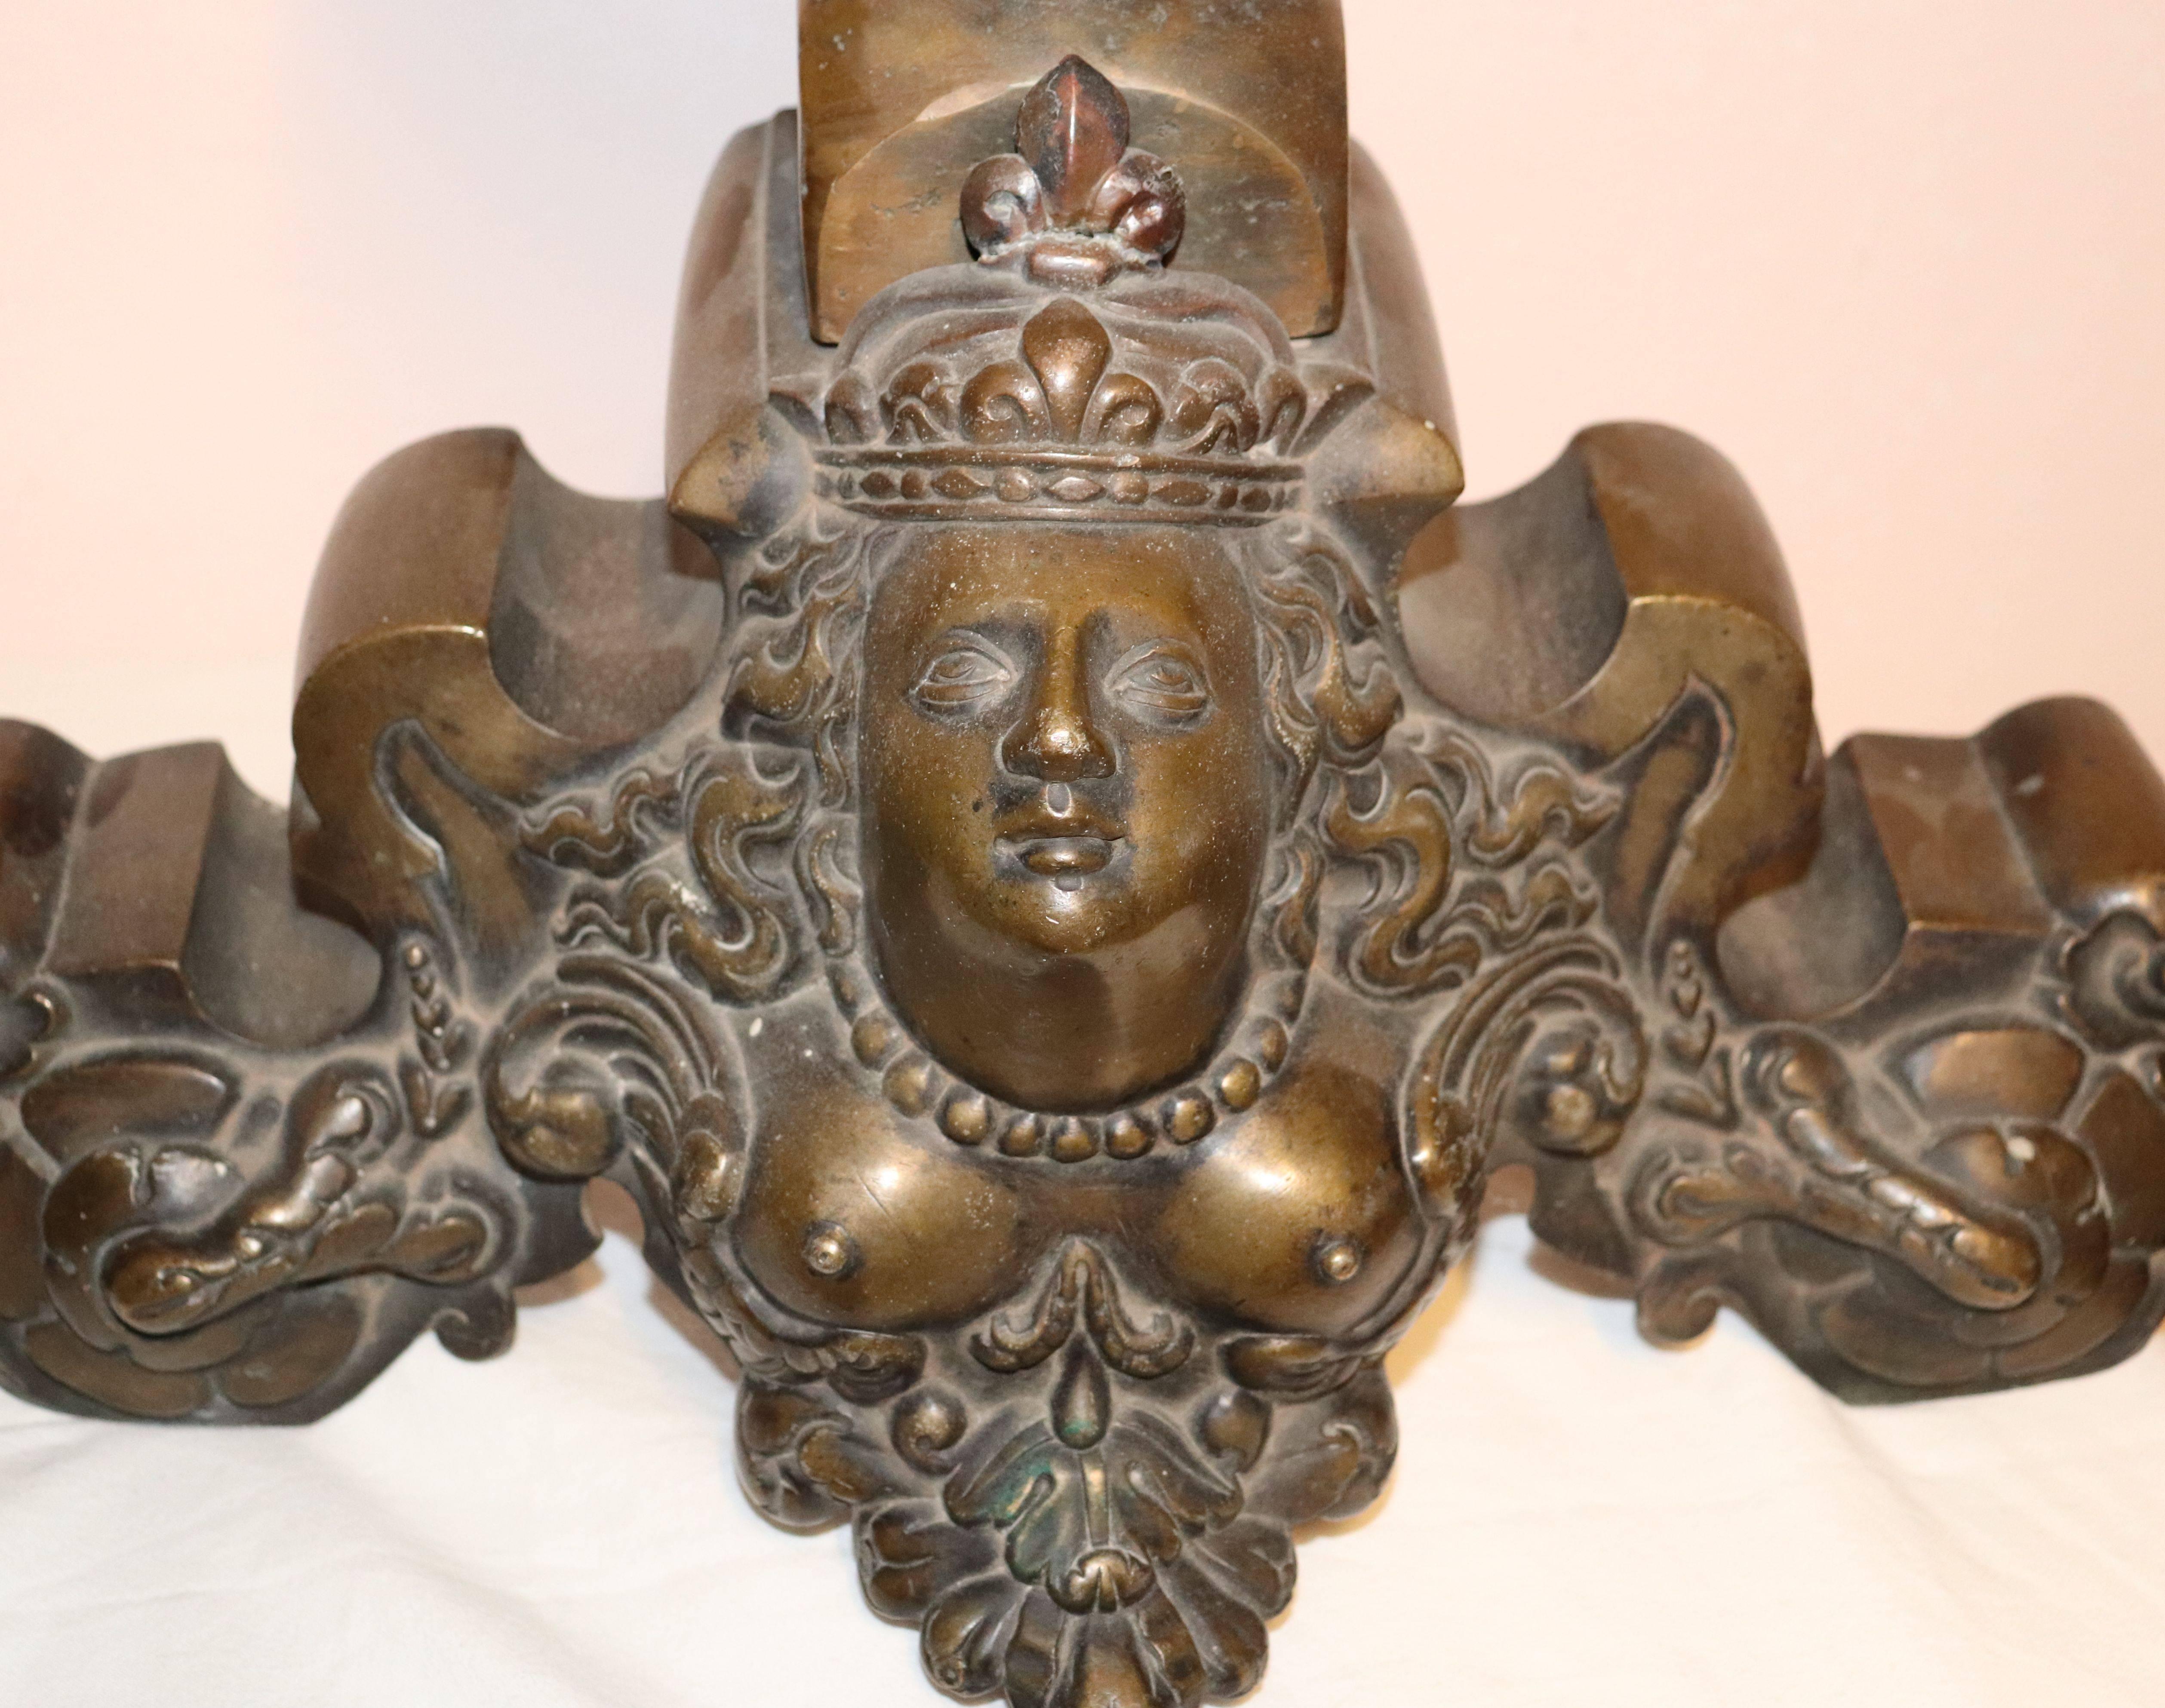 Pair of French Baroque bronze chenets
Provenance Åsgård mansion Mariefred/Sweden.